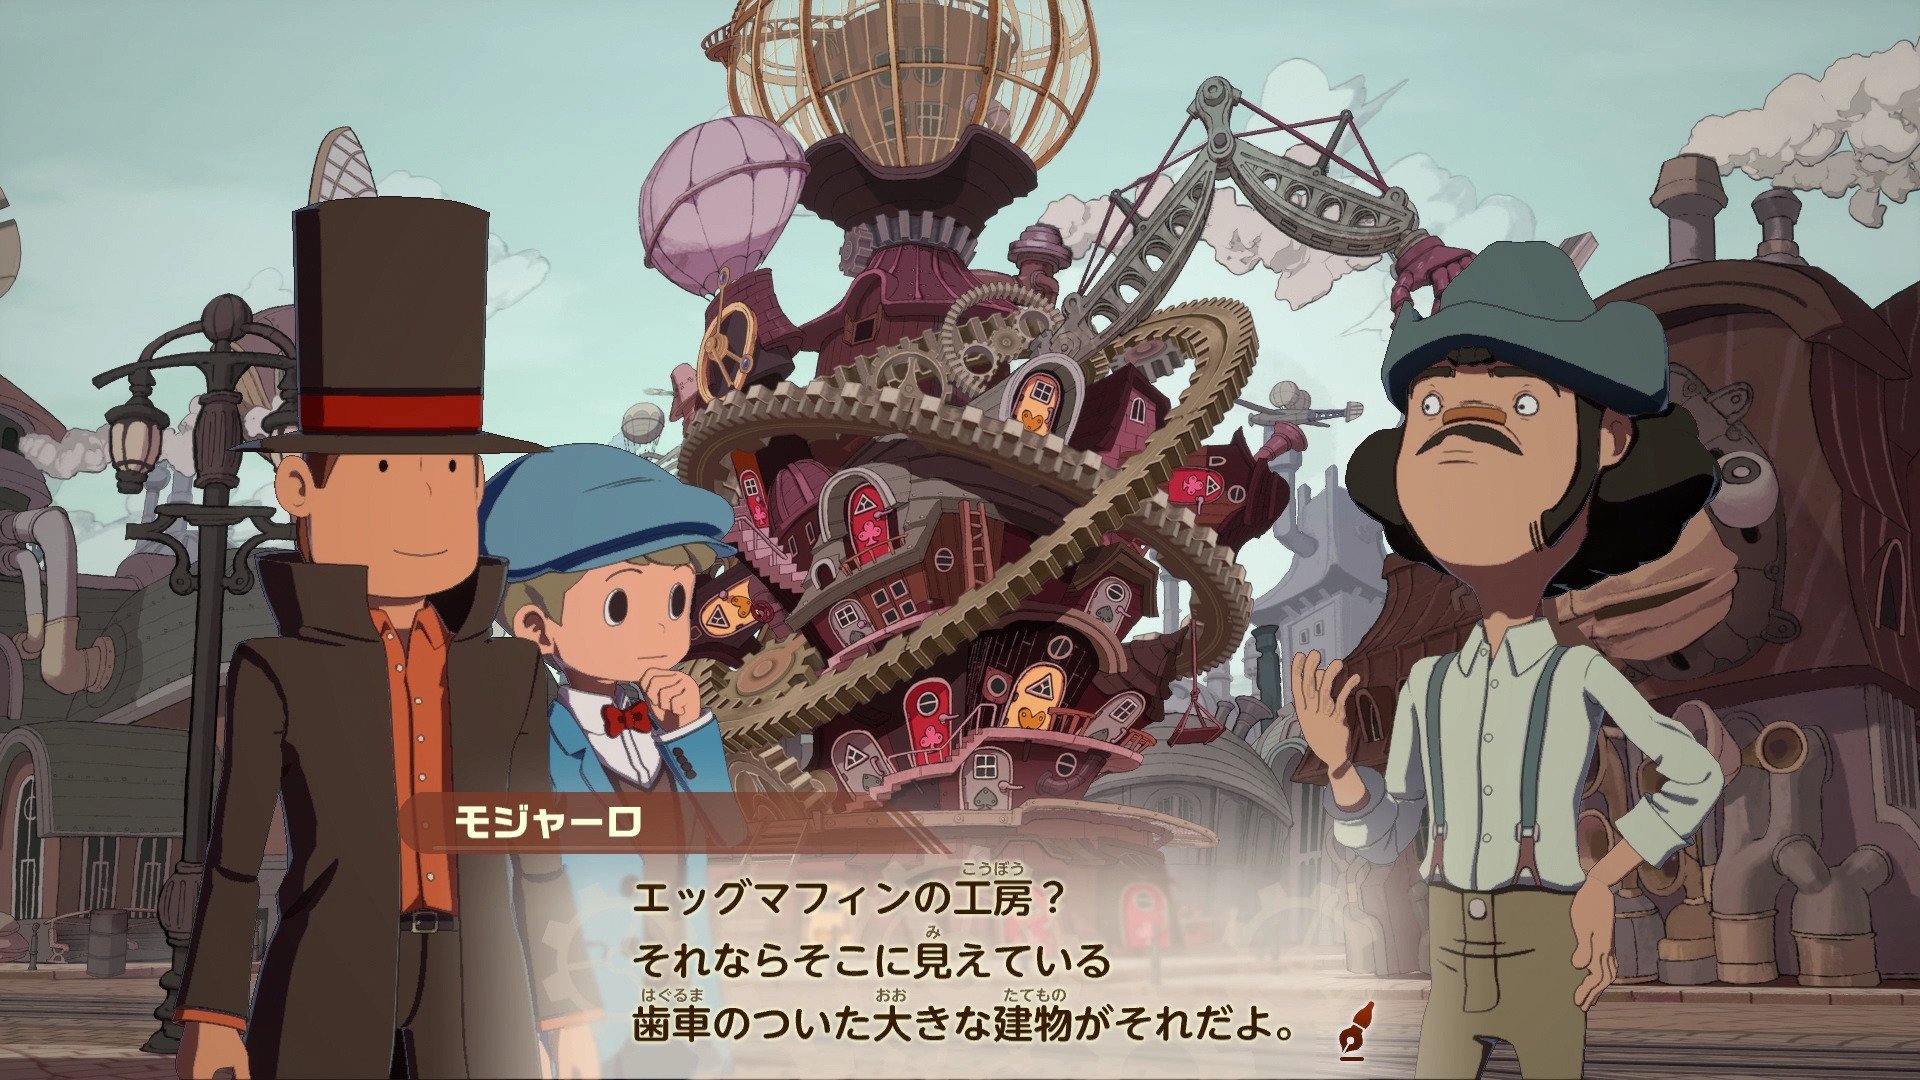 PROFESSOR LAYTON and The New World of Steam - Nintendo Direct 2.8.2023 